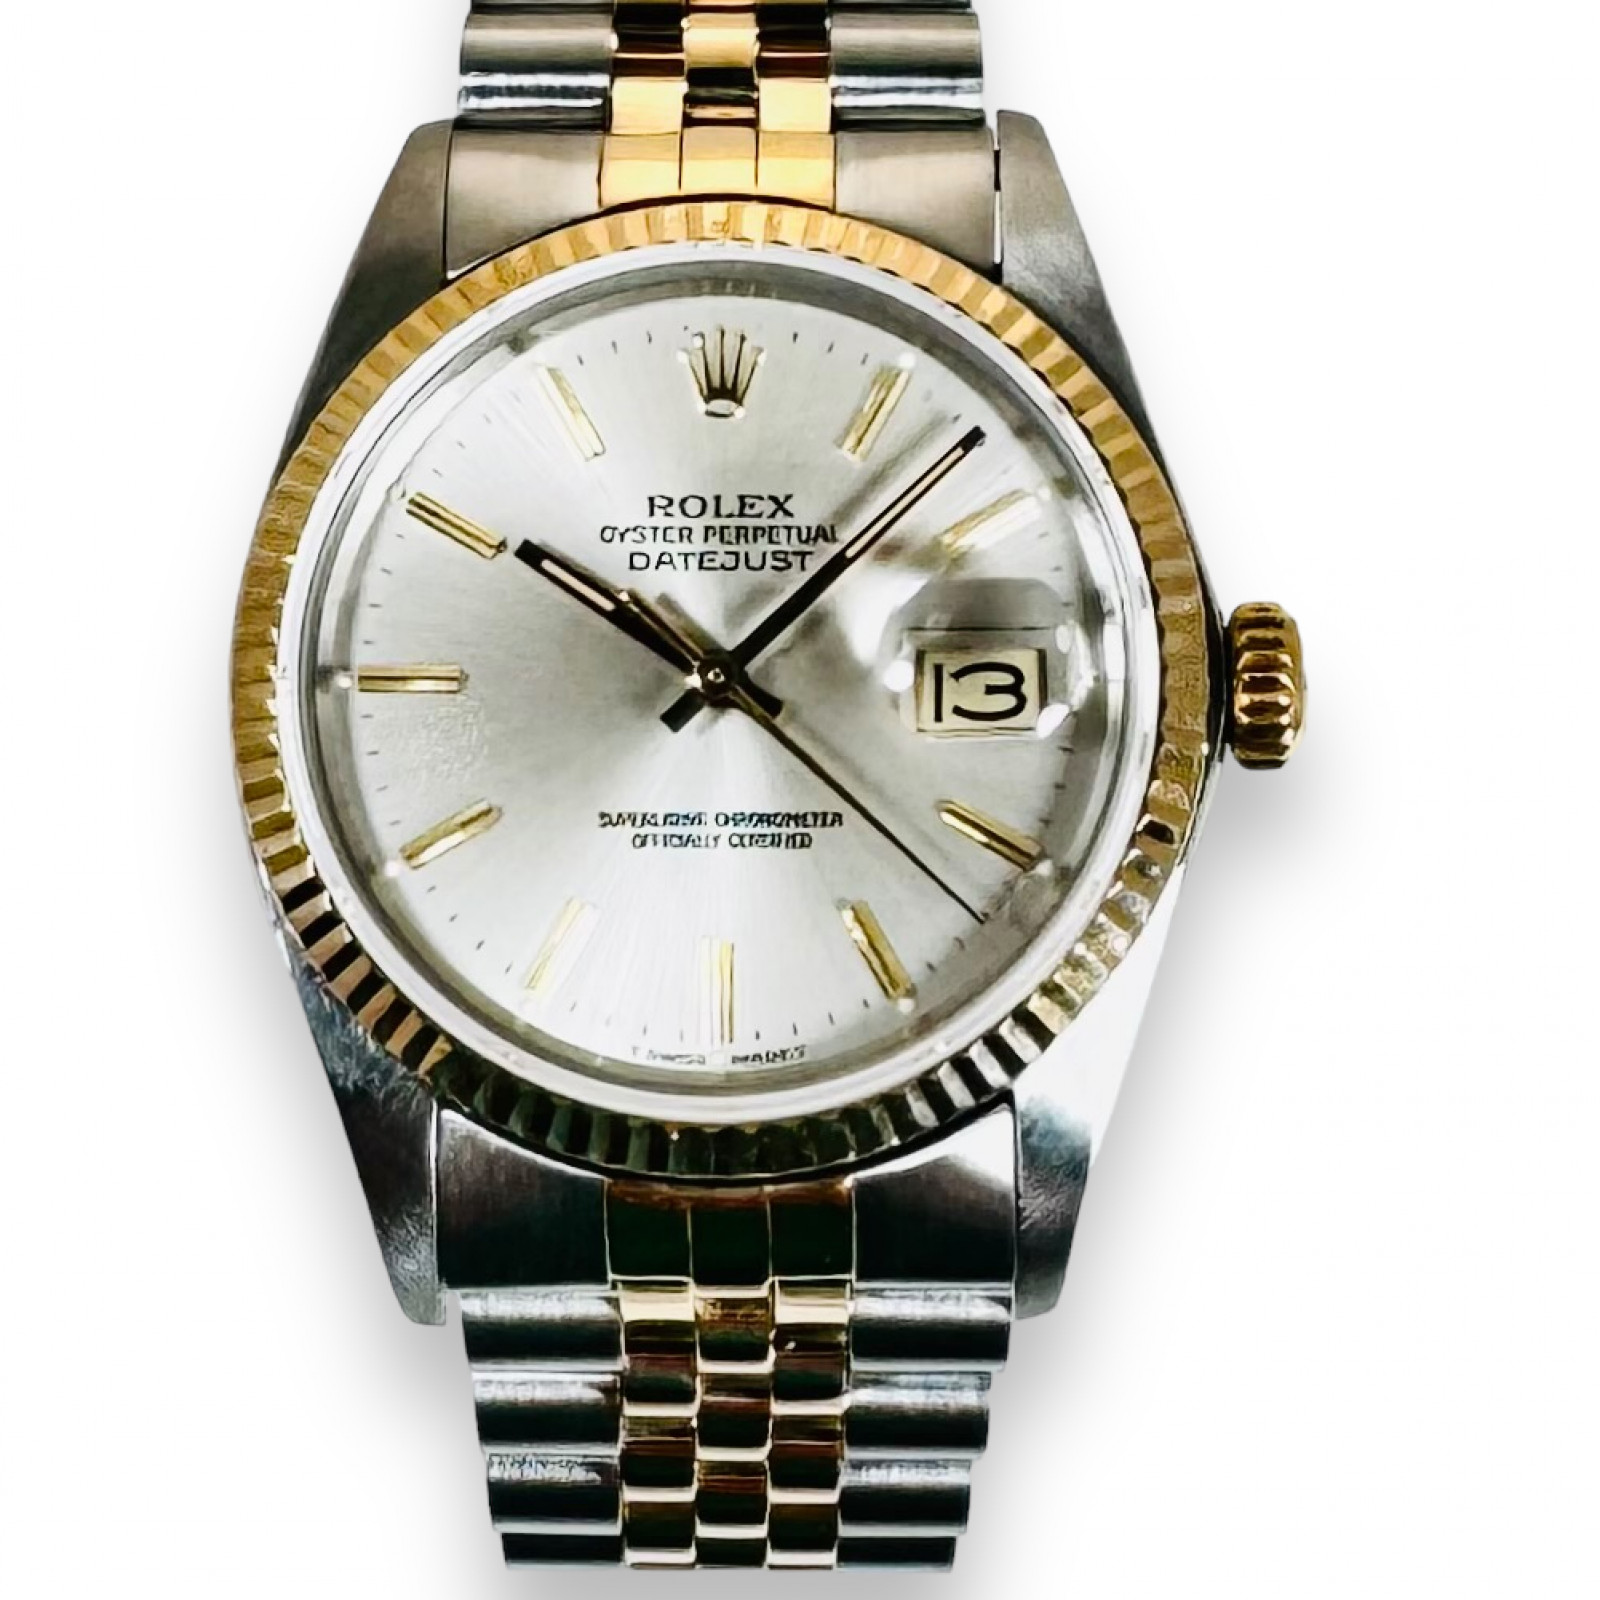 Rolex Datejust 16013 Silver Dial